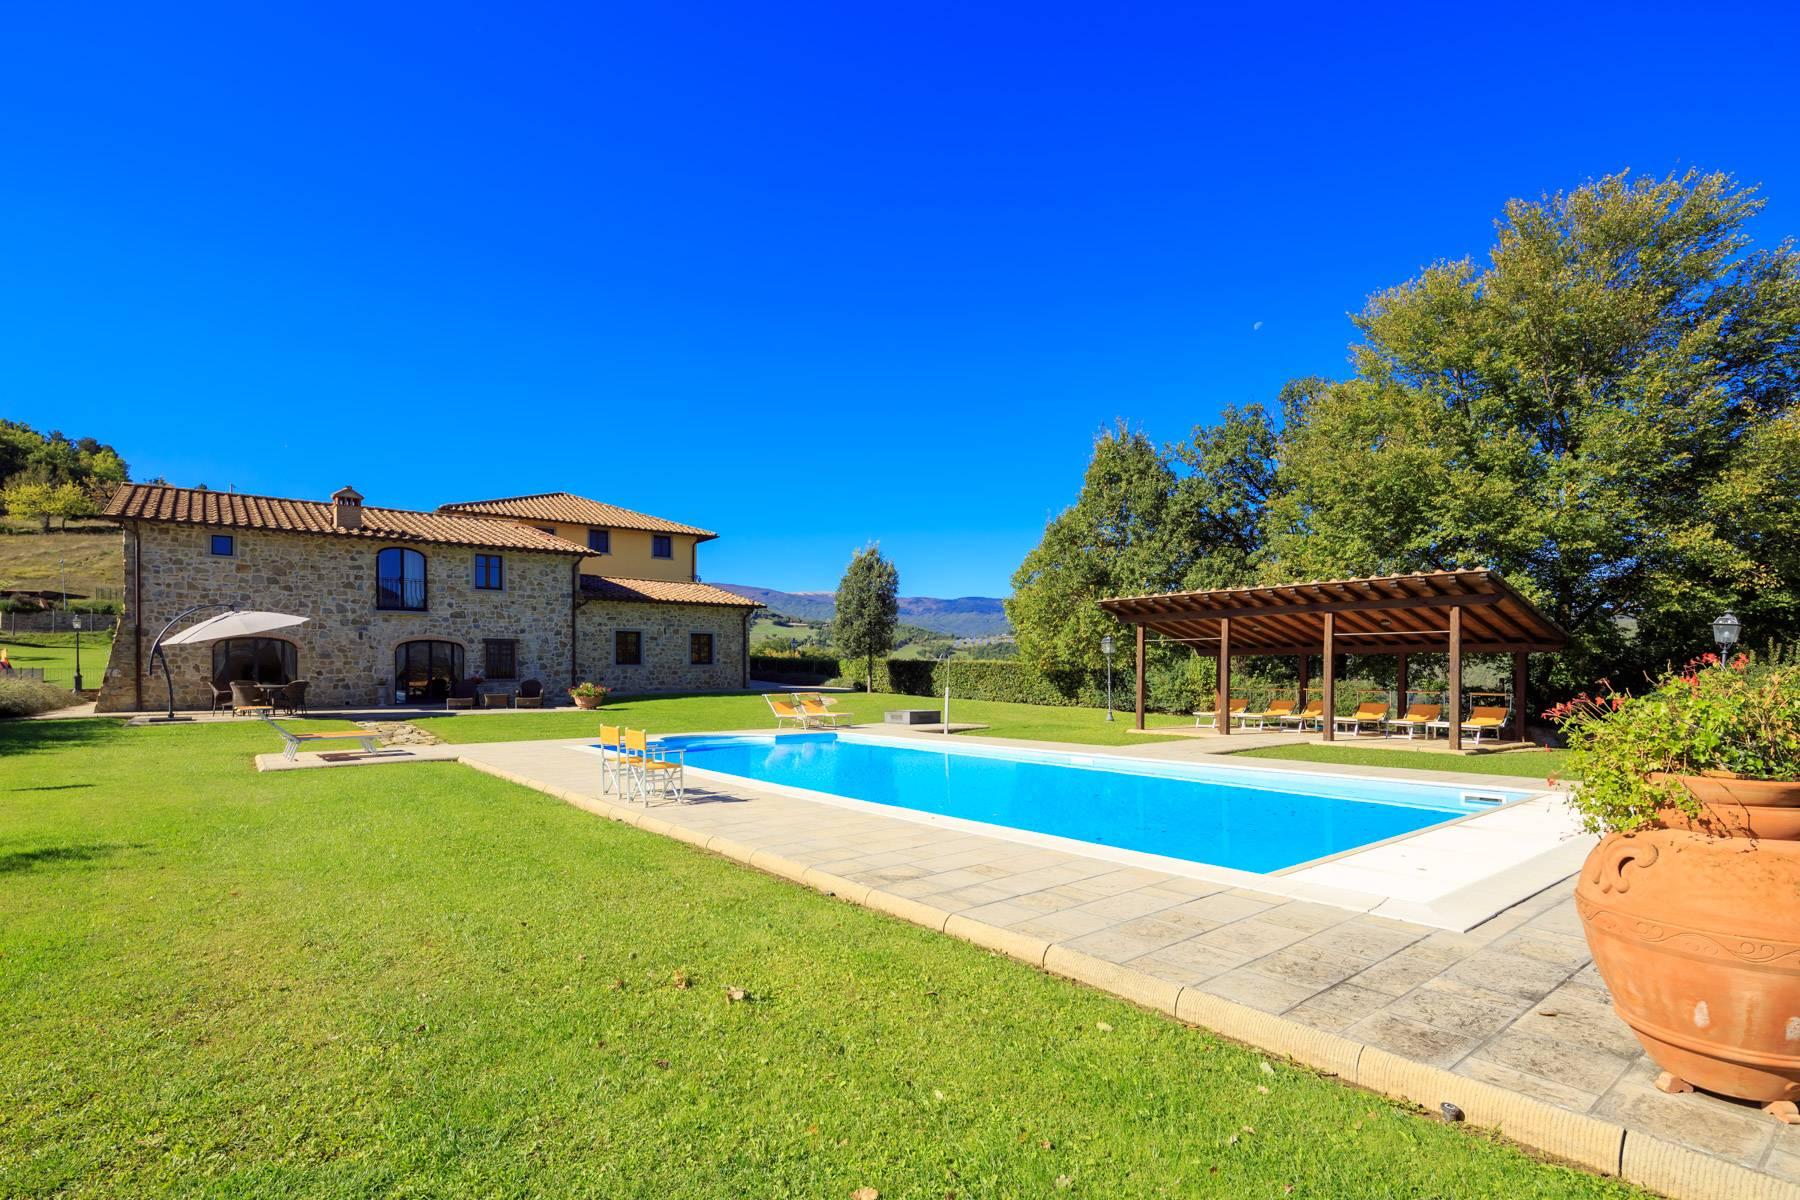 Marvelous estate with views over the Casentino valley - 4